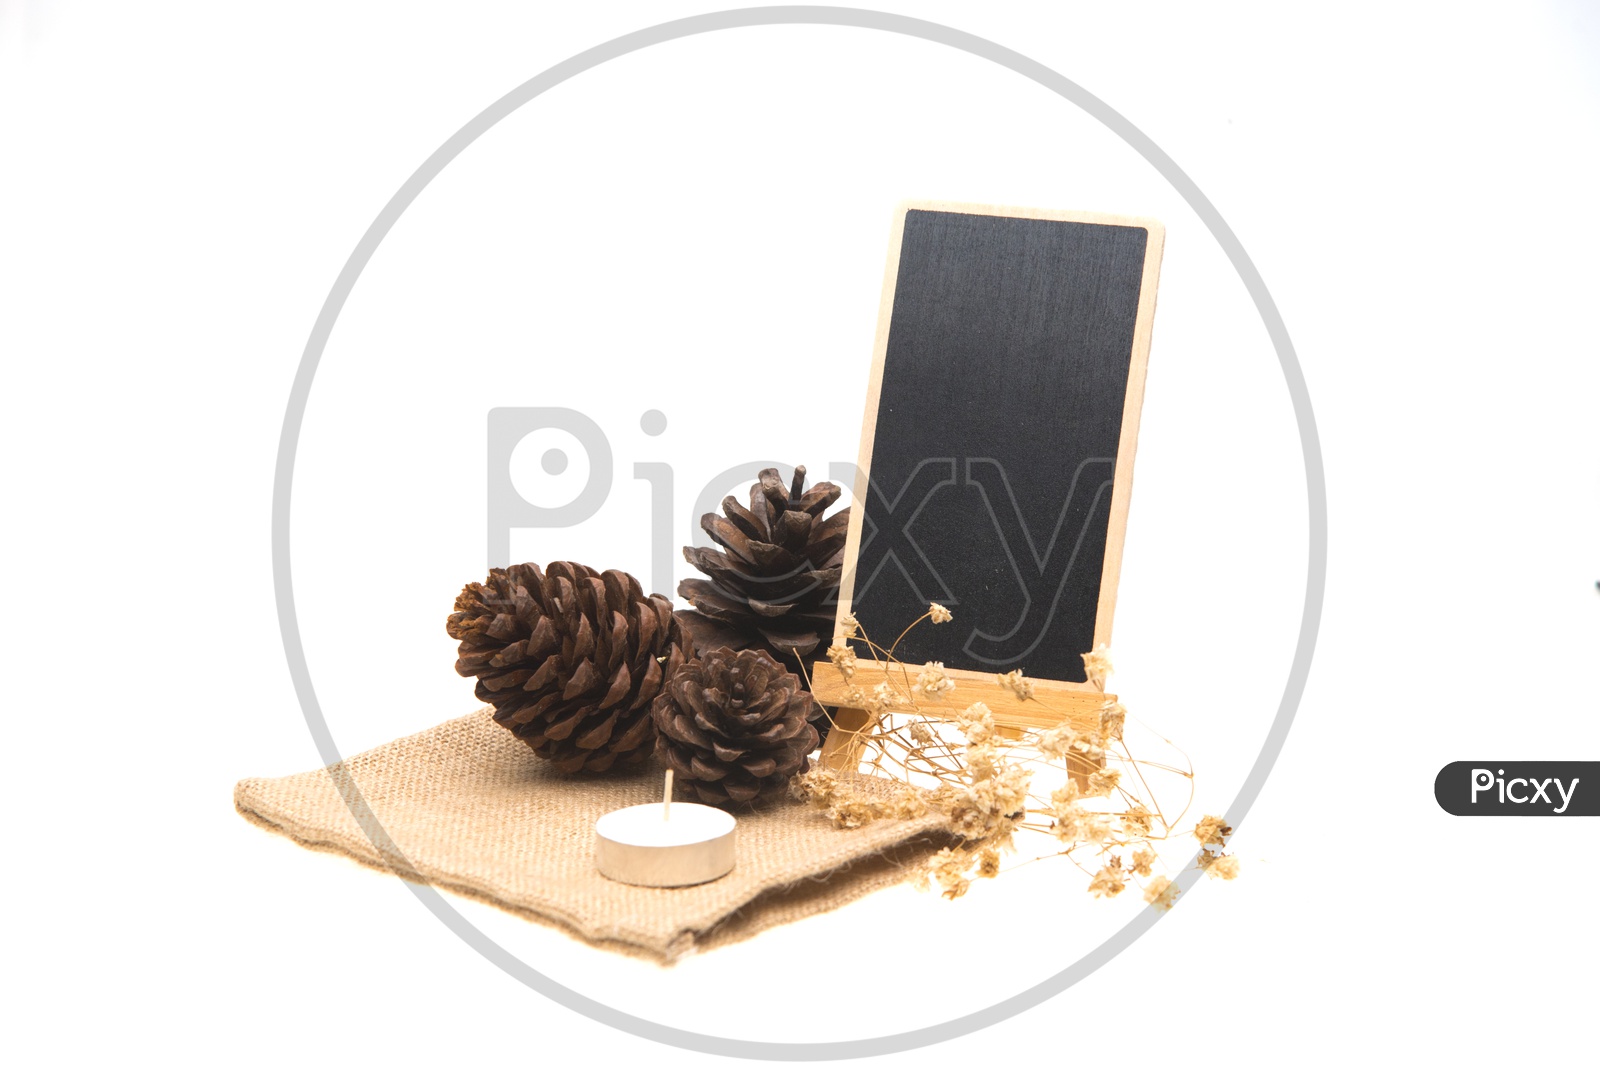 Blackboard, pine cone and candles